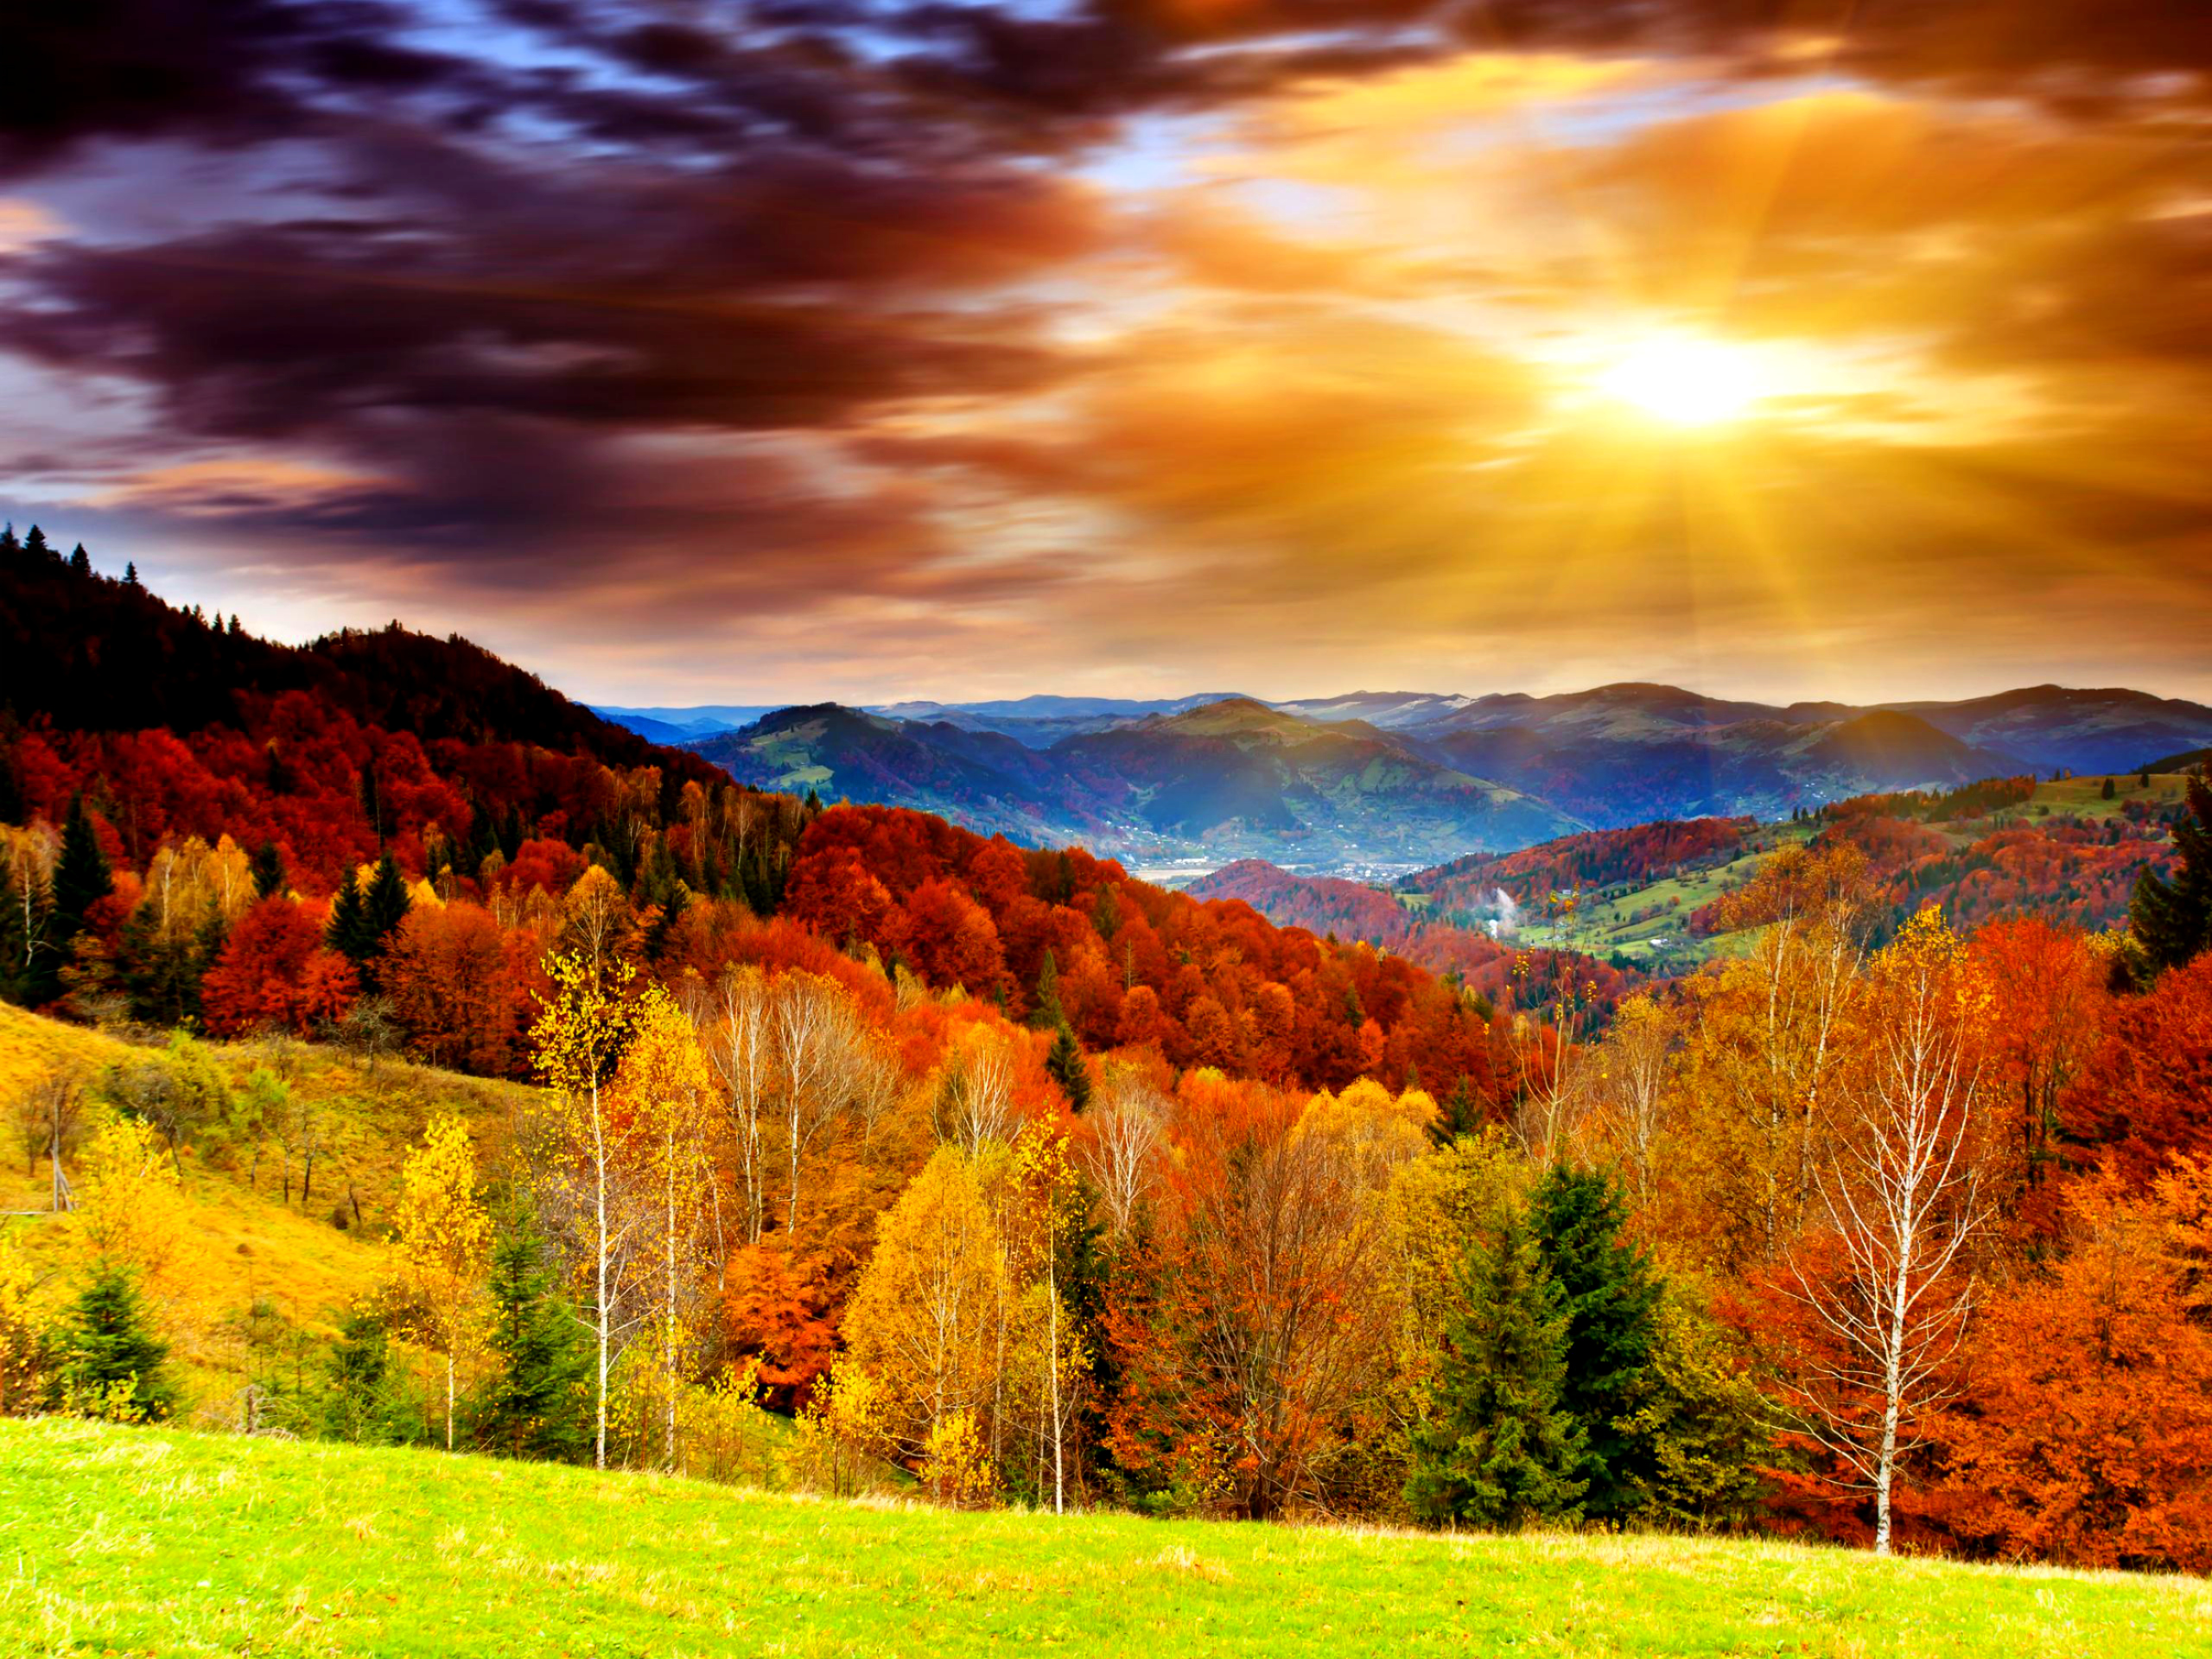 Collection of Autumn Colors Wallpaper on HDWallpapers